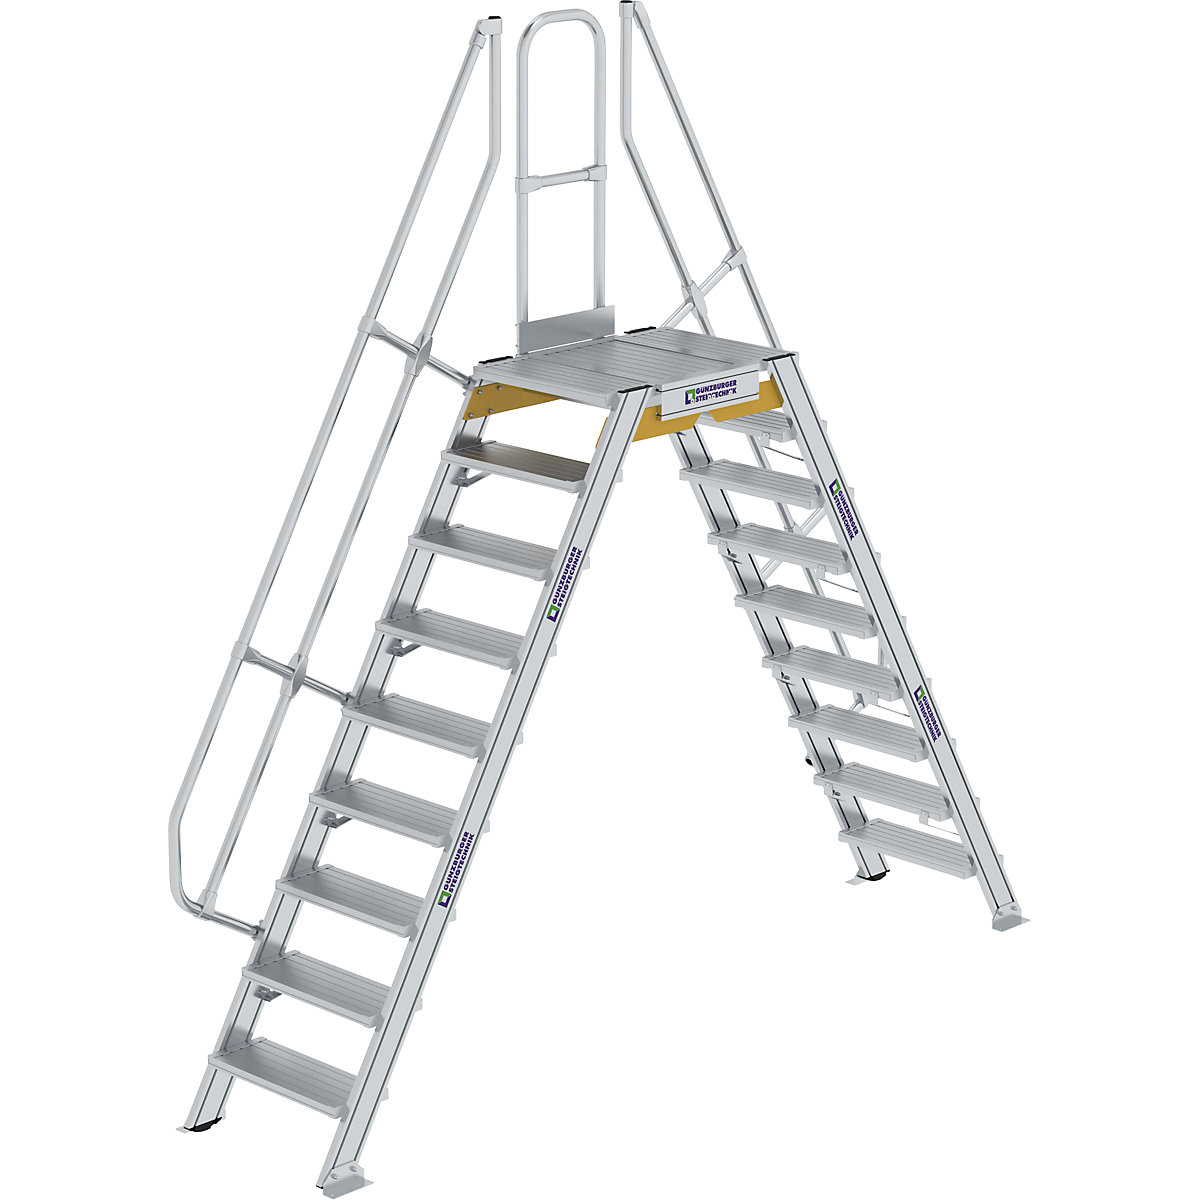 Passerelle – MUNK, charge max. totale 300 kg, 9 marches, plate-forme 800 x 600 mm-3